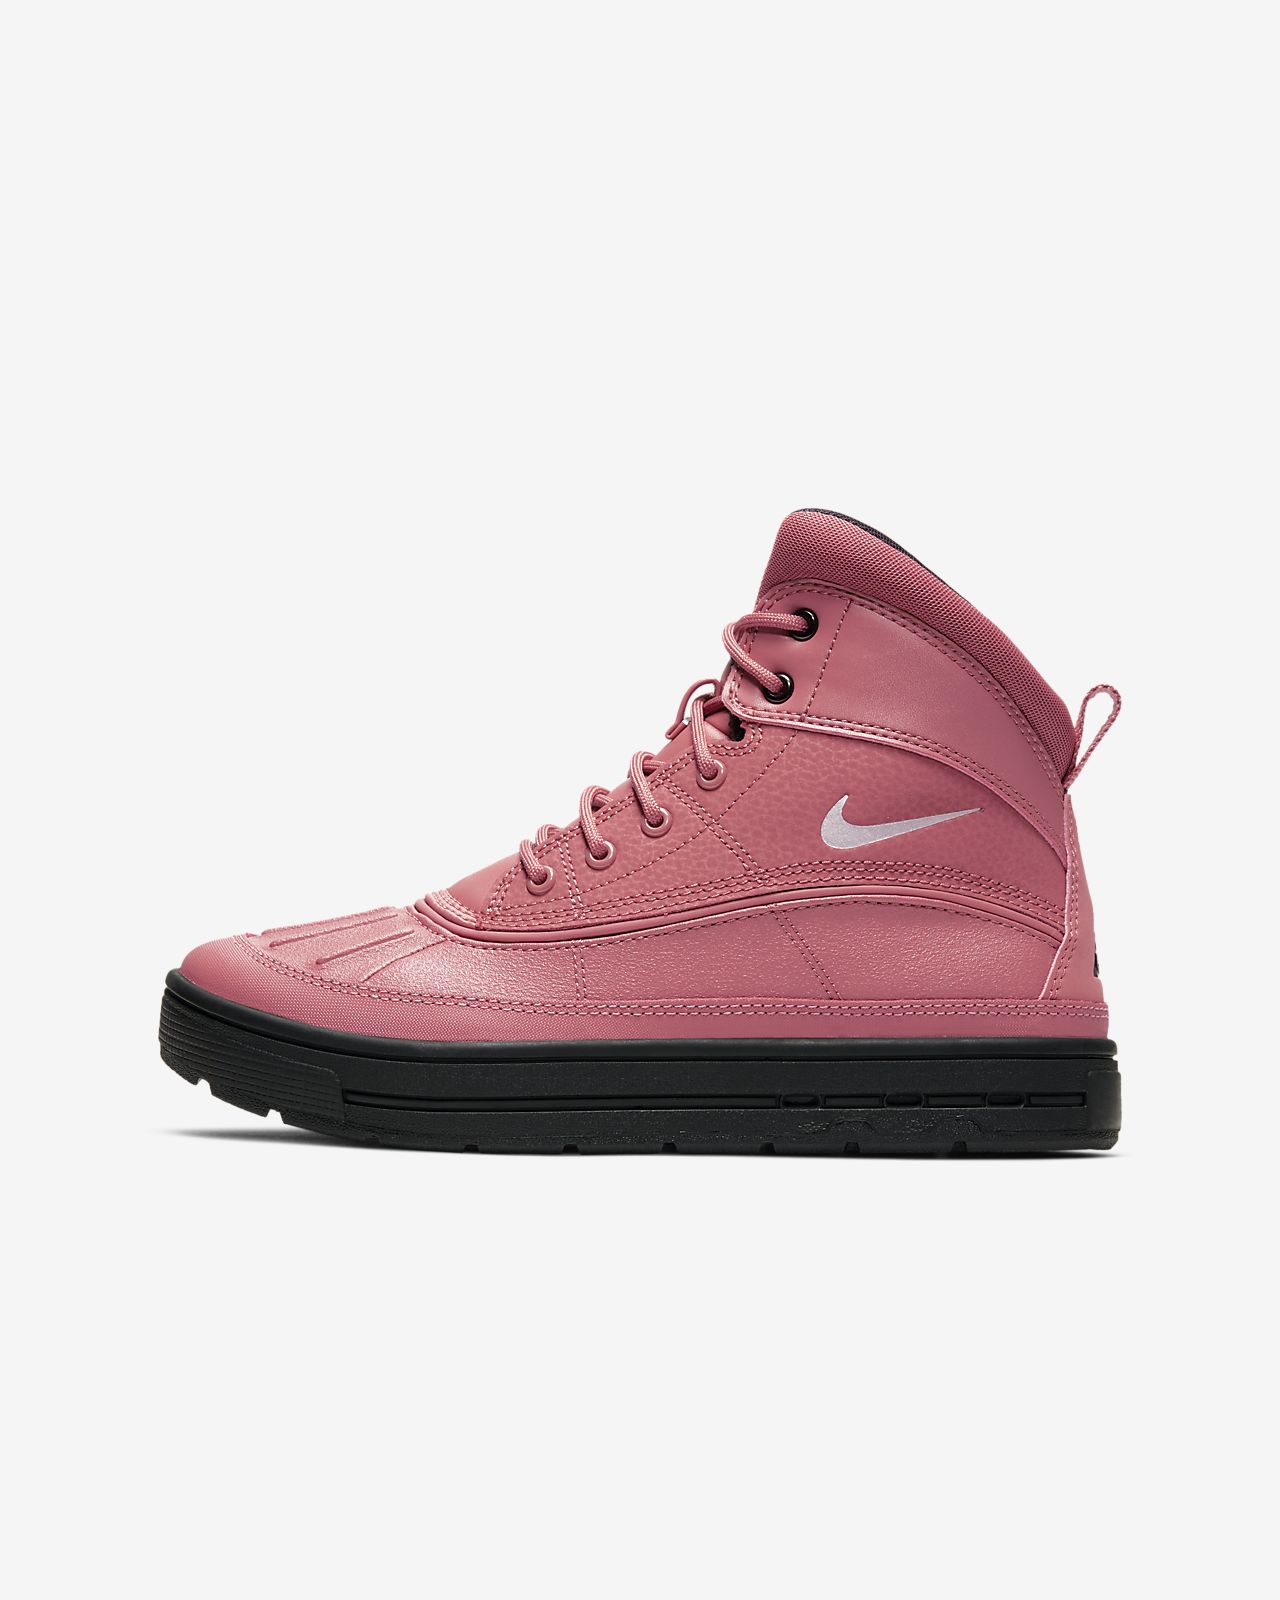 kids nike acg boots Online Shopping for 